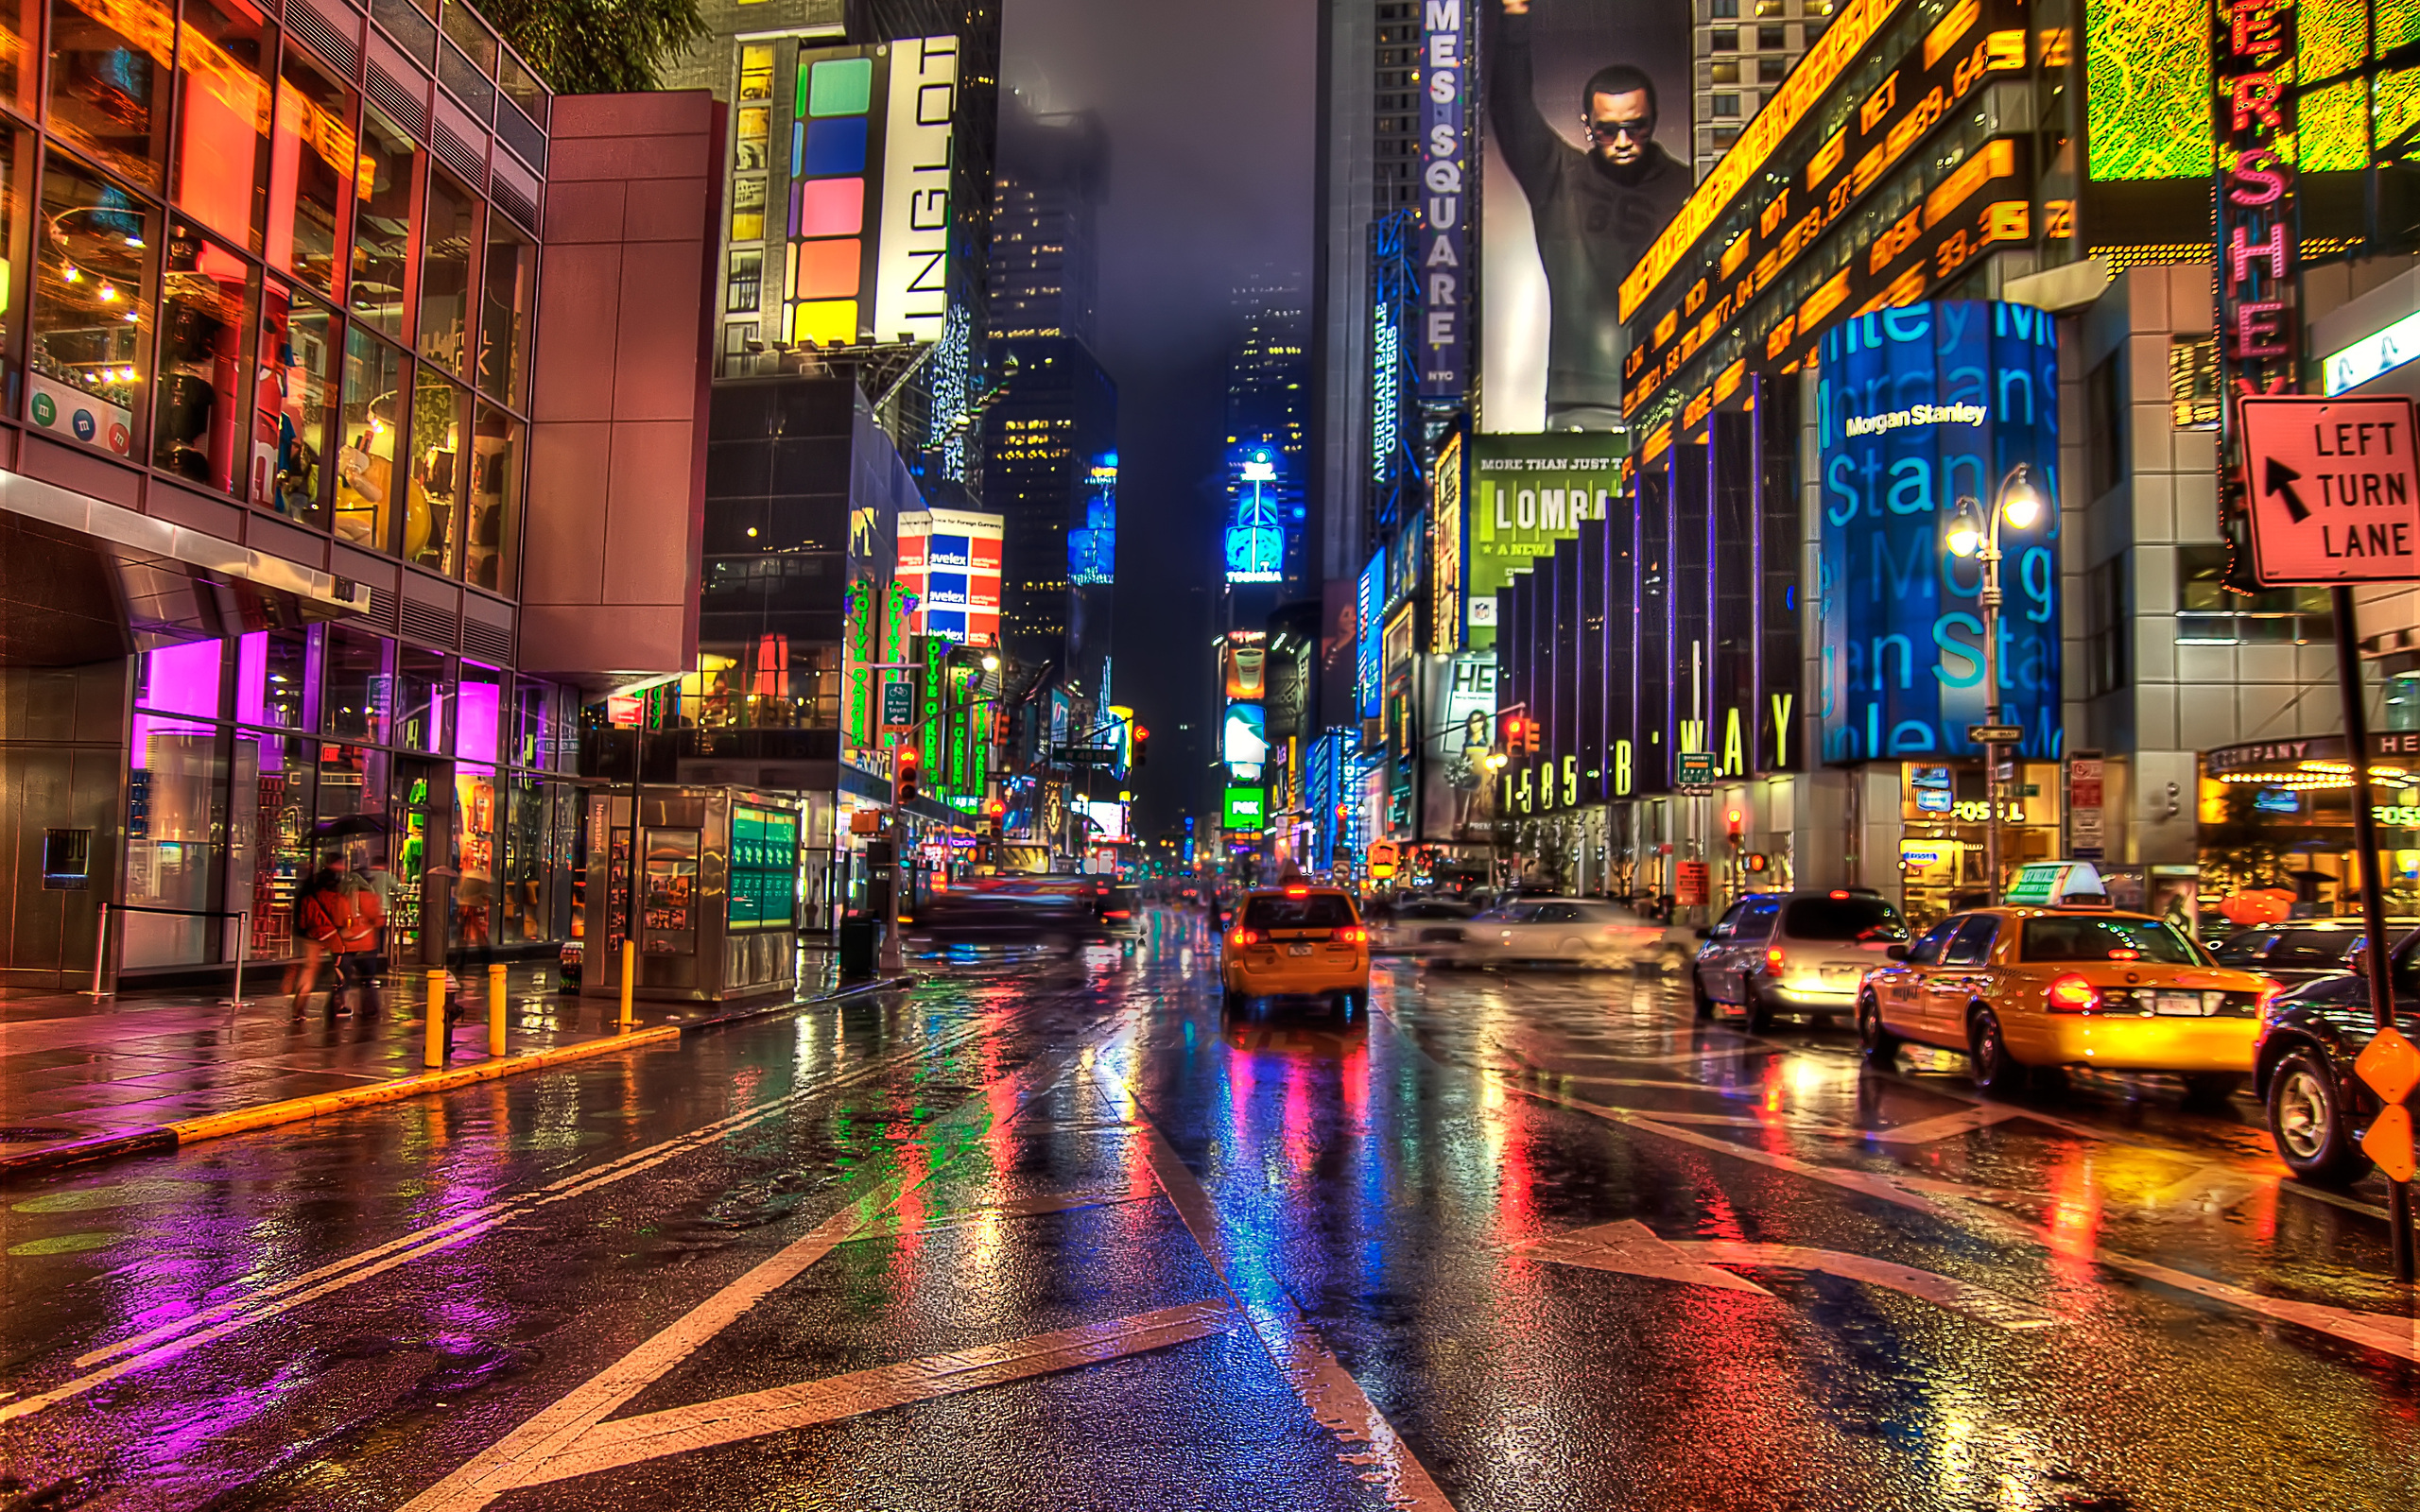 new, York, Hdr, Streets, Taxi, Cars, Traffic, Architecture, Buildings, Sidewalk, People, Crowds, Storm, Rain, Drops Wallpaper